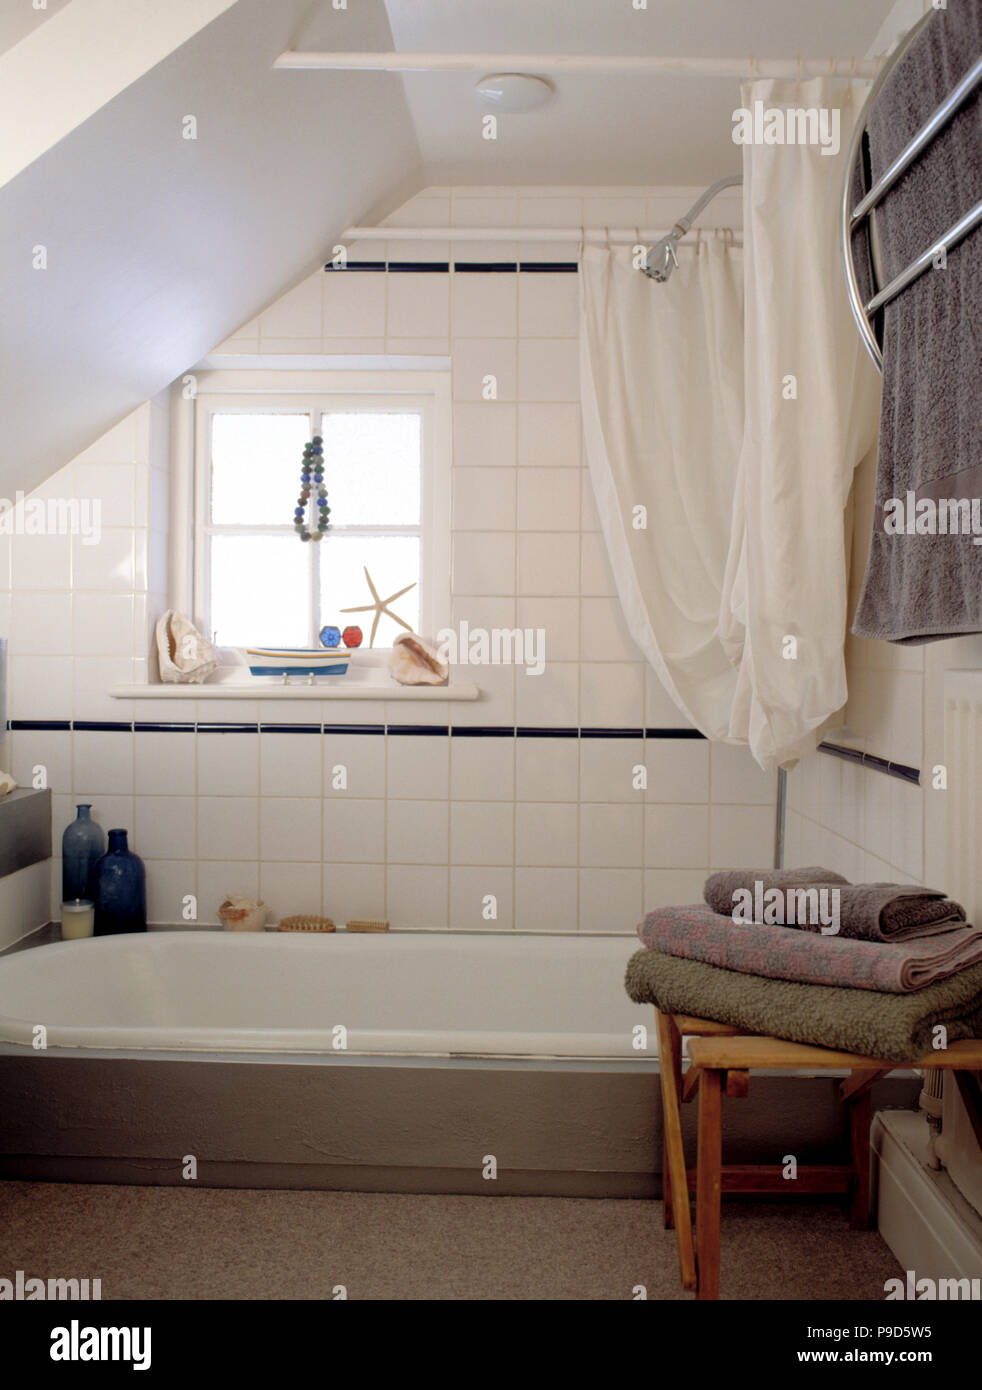 Brown towels on stool beside bath in white tiled attic bathroom Stock Photo